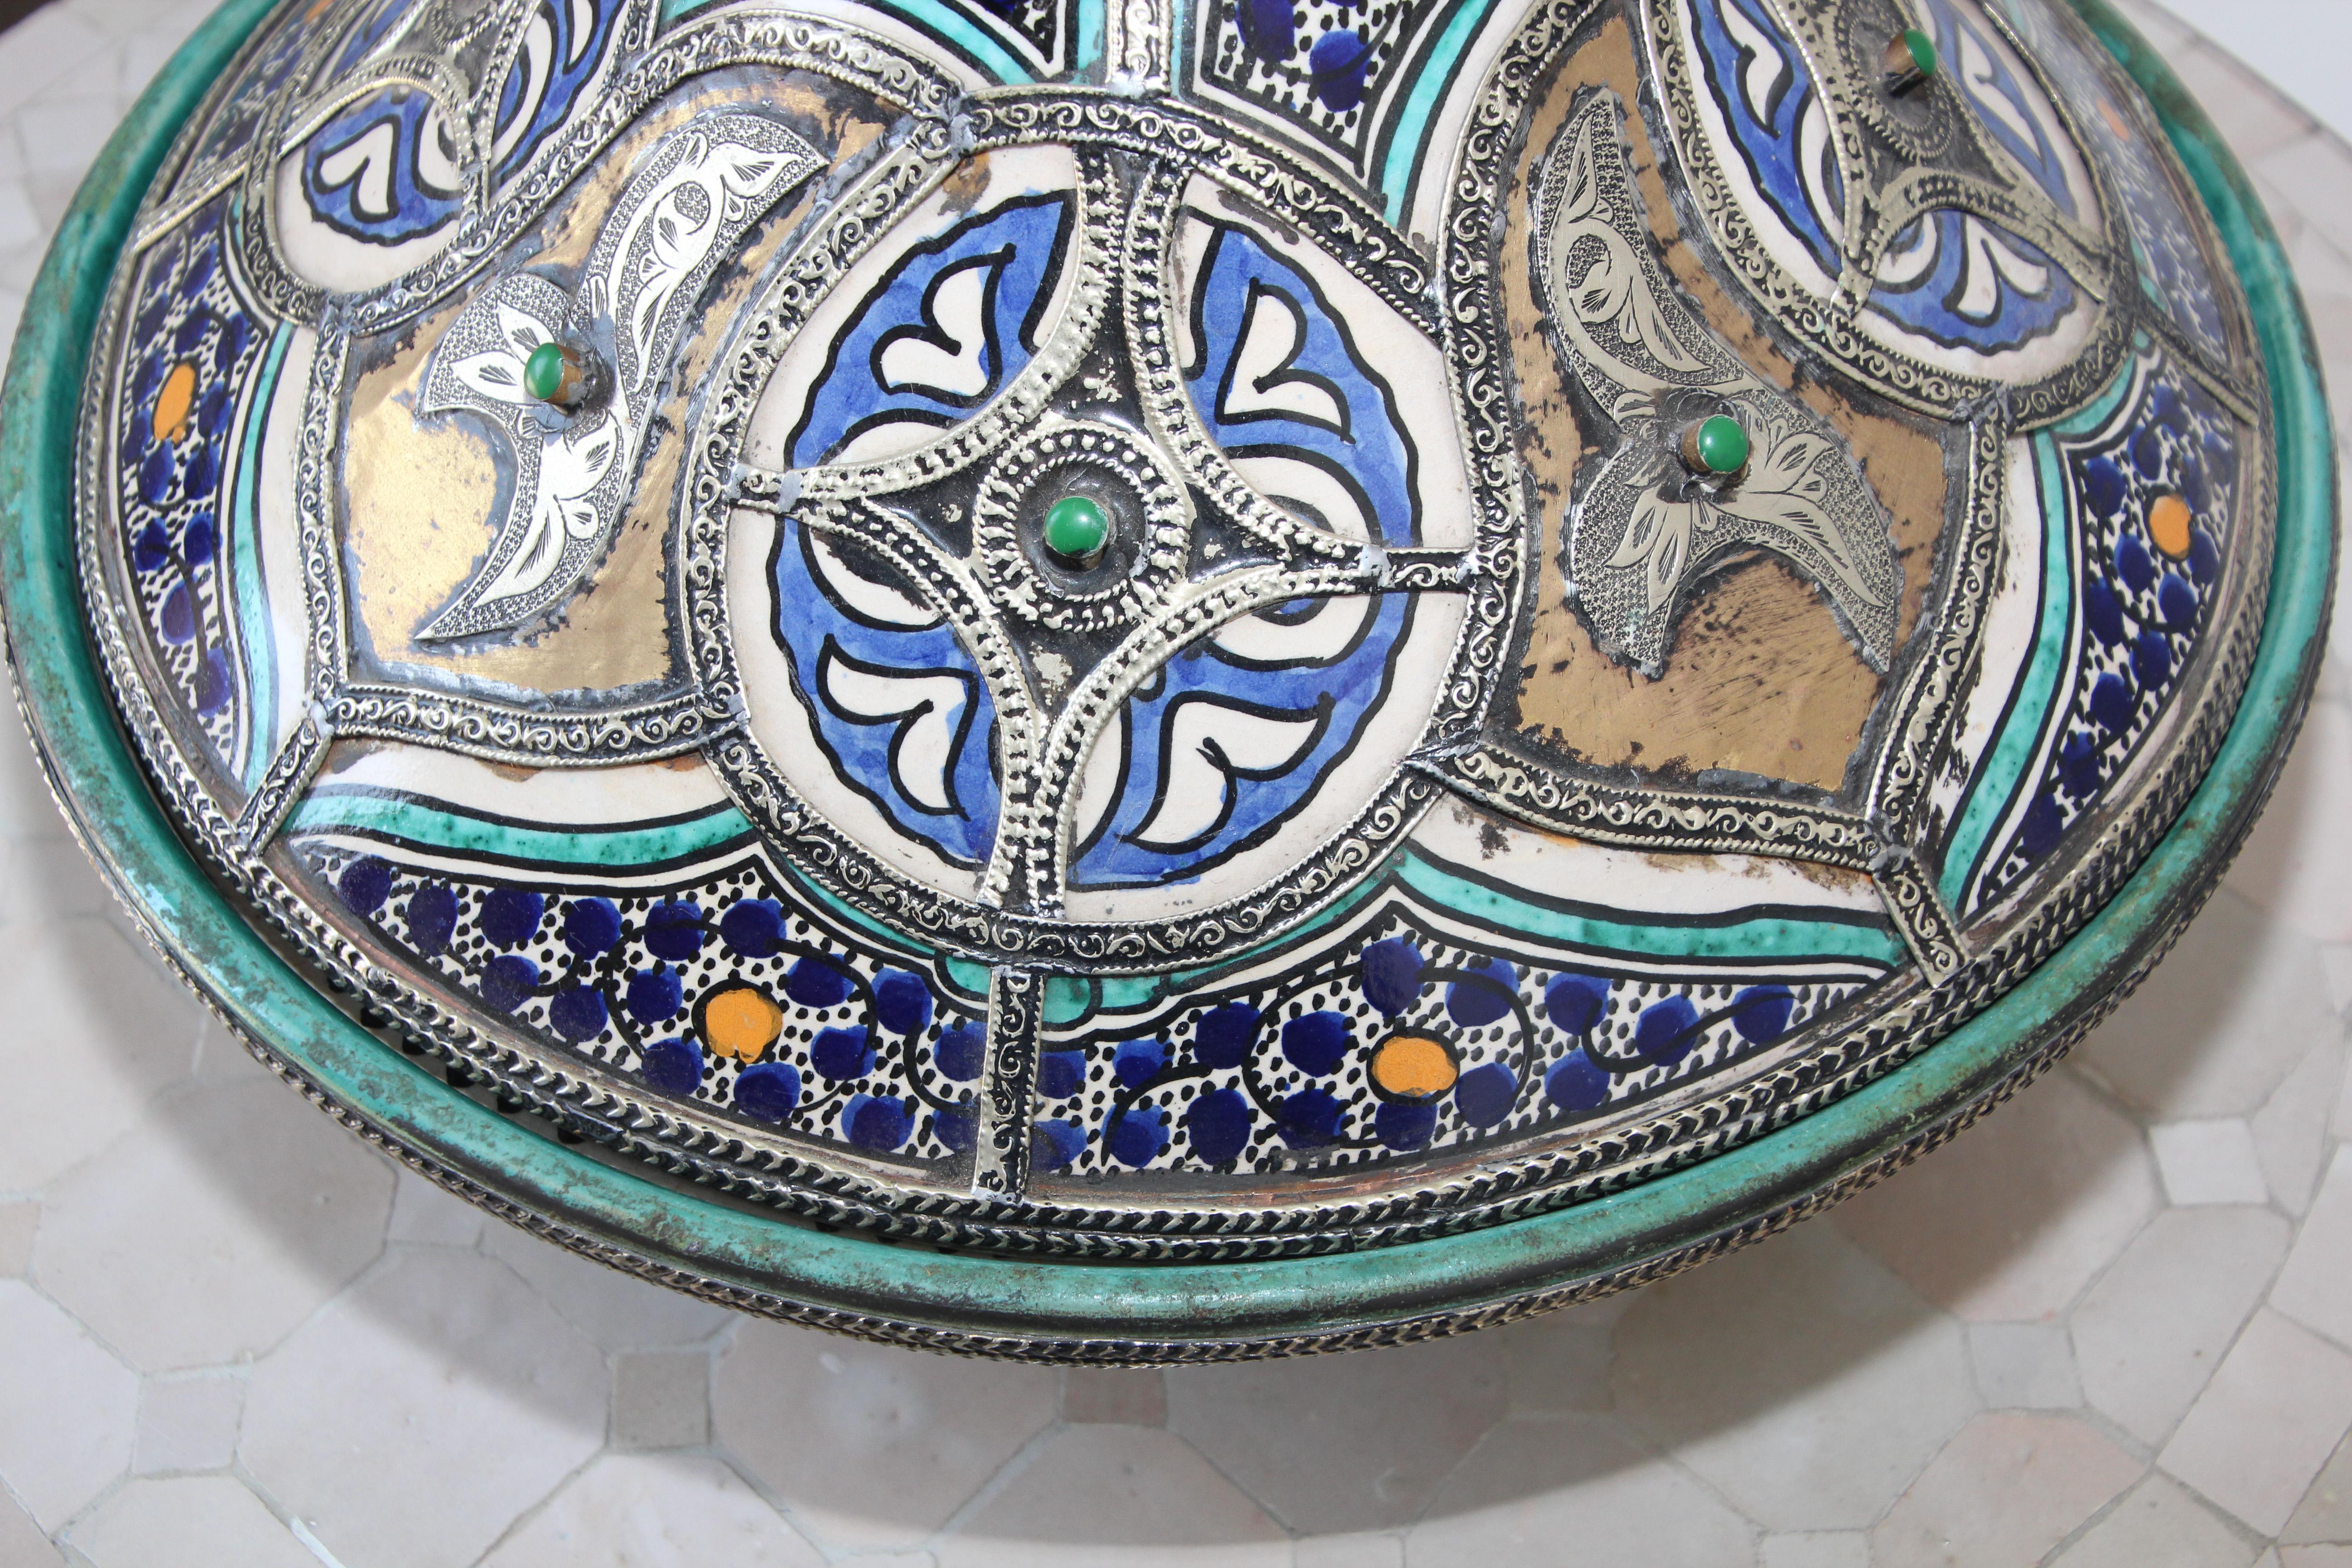 Moroccan Ceramic Bowl with Lid Tajine from Fez Polychrome In Good Condition For Sale In North Hollywood, CA